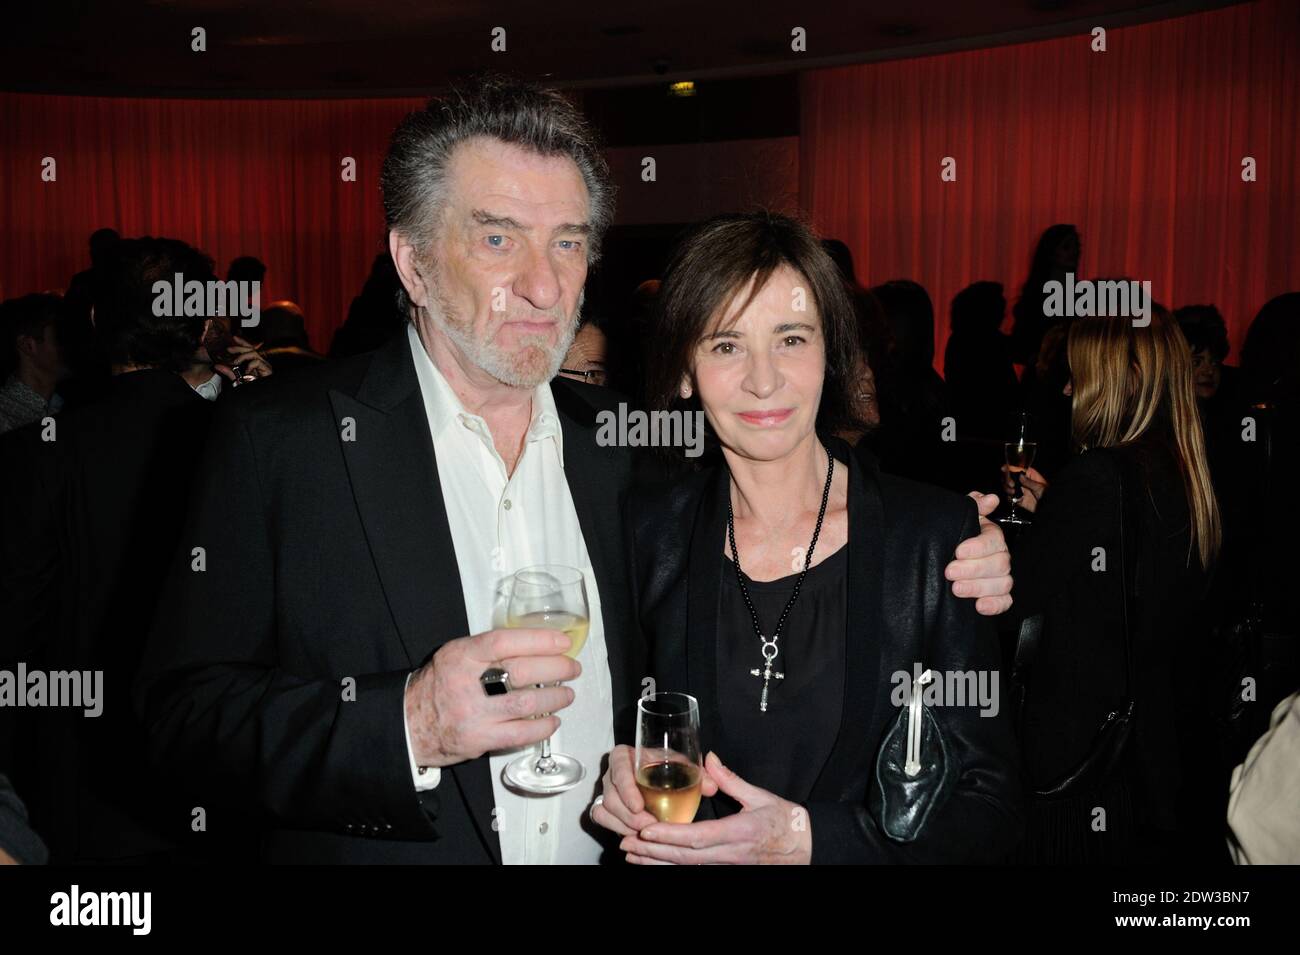 Muriel Bailleul, Eddy Mitchell attending 'Salaud On T'Aime' After Party at Cinema L'Elysee Biarritz presented by Benjamin Patou, chairman of the Moma Group in Paris, France on March 31, 2014. Photo by Alban Wyters/ABACAPRESS.COM Stock Photo